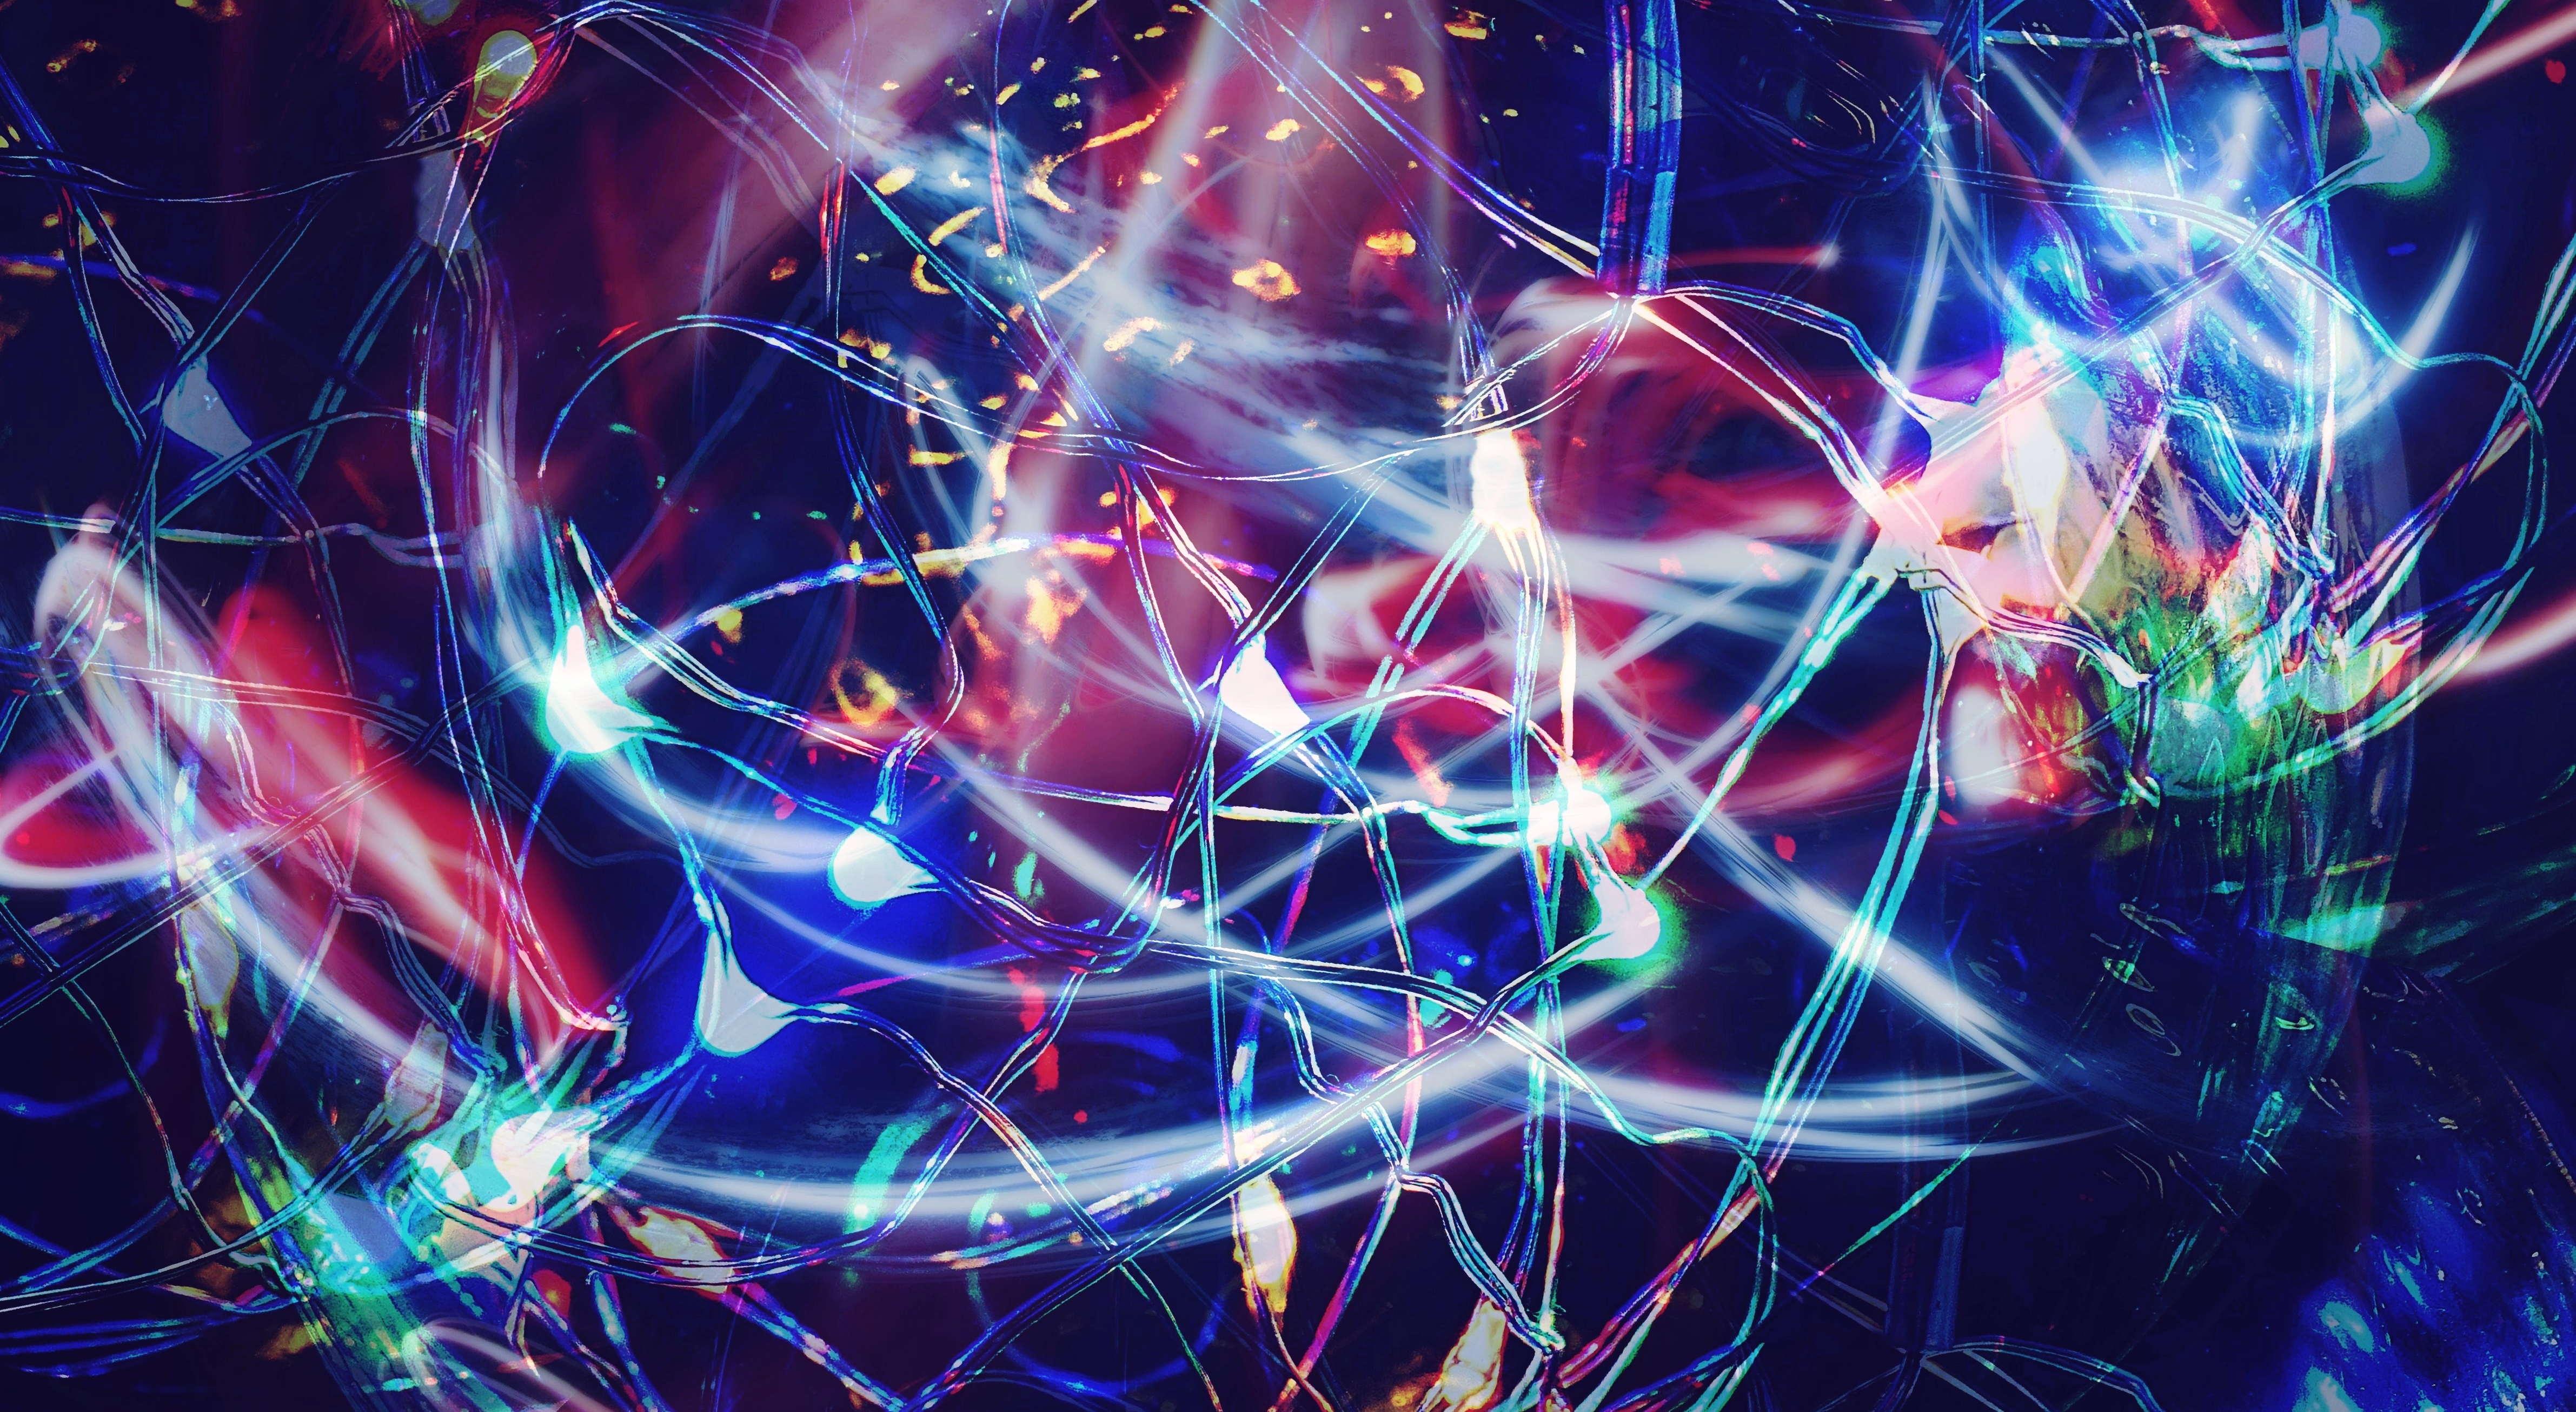 neon, abstract, lights, multicolored, motley, garland Image for desktop